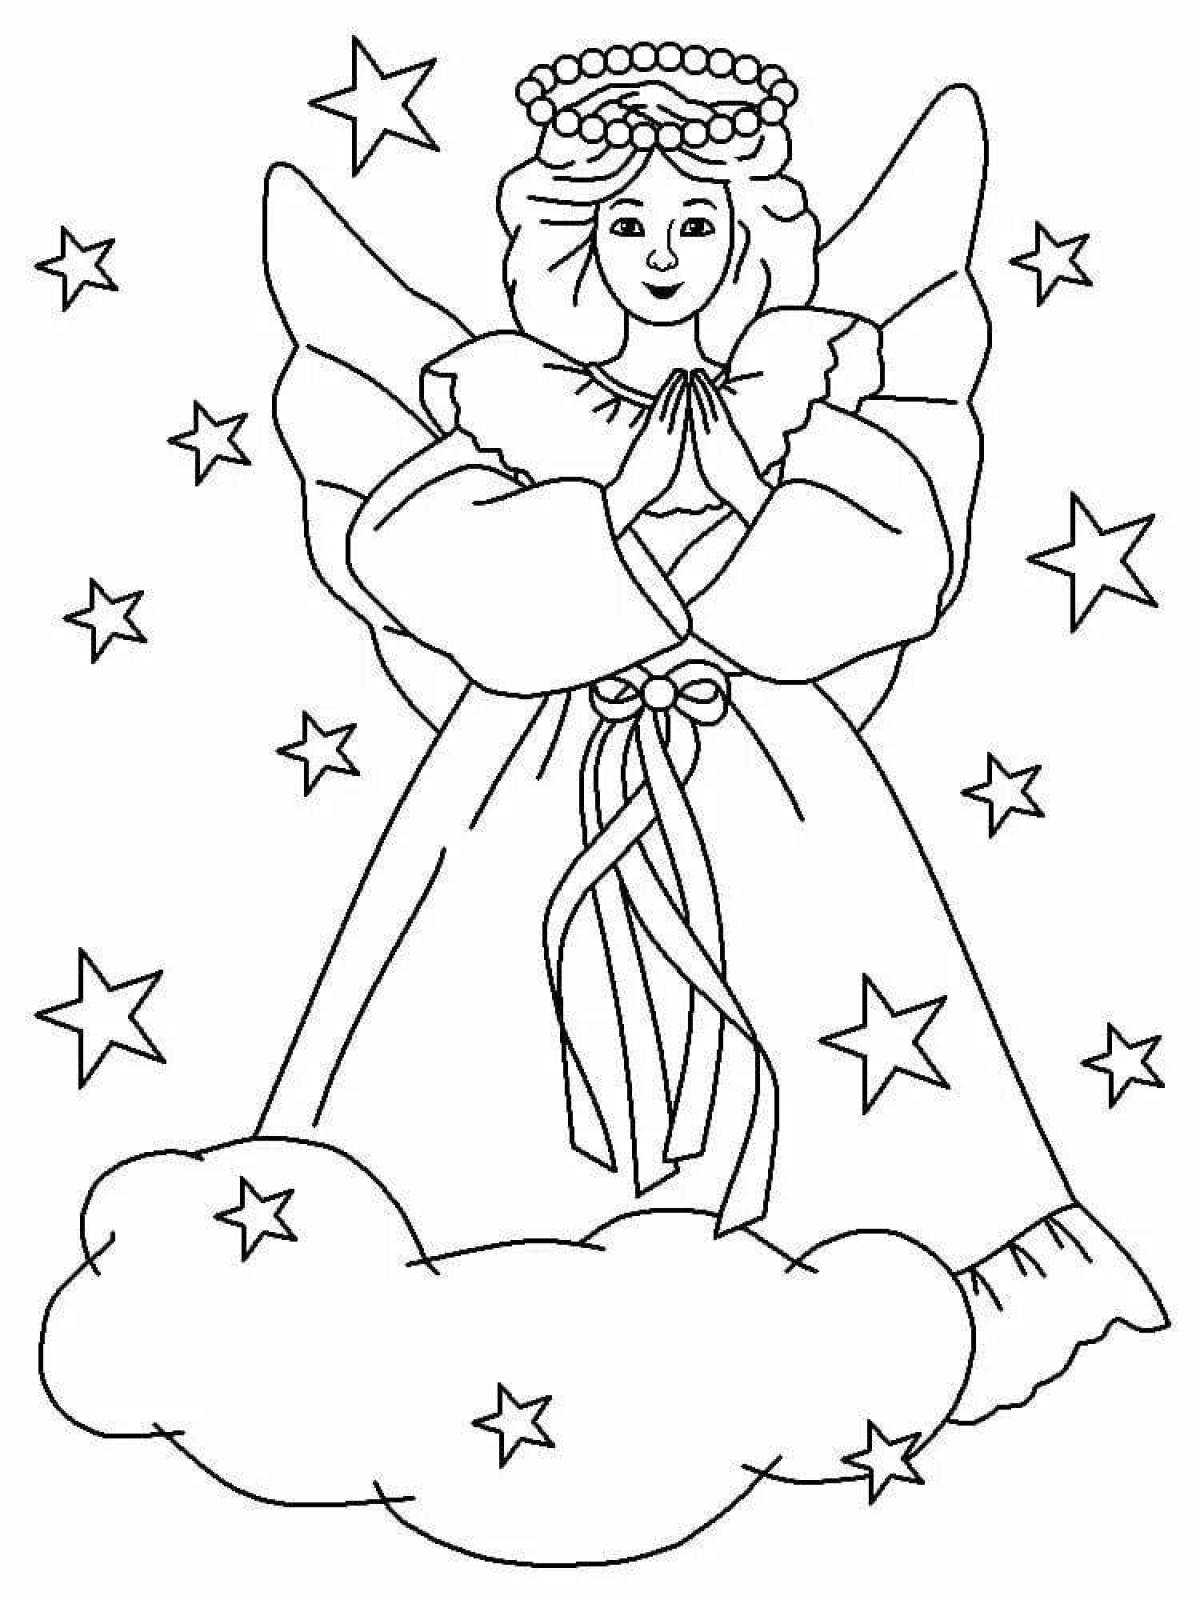 Sparkly merry christmas coloring book